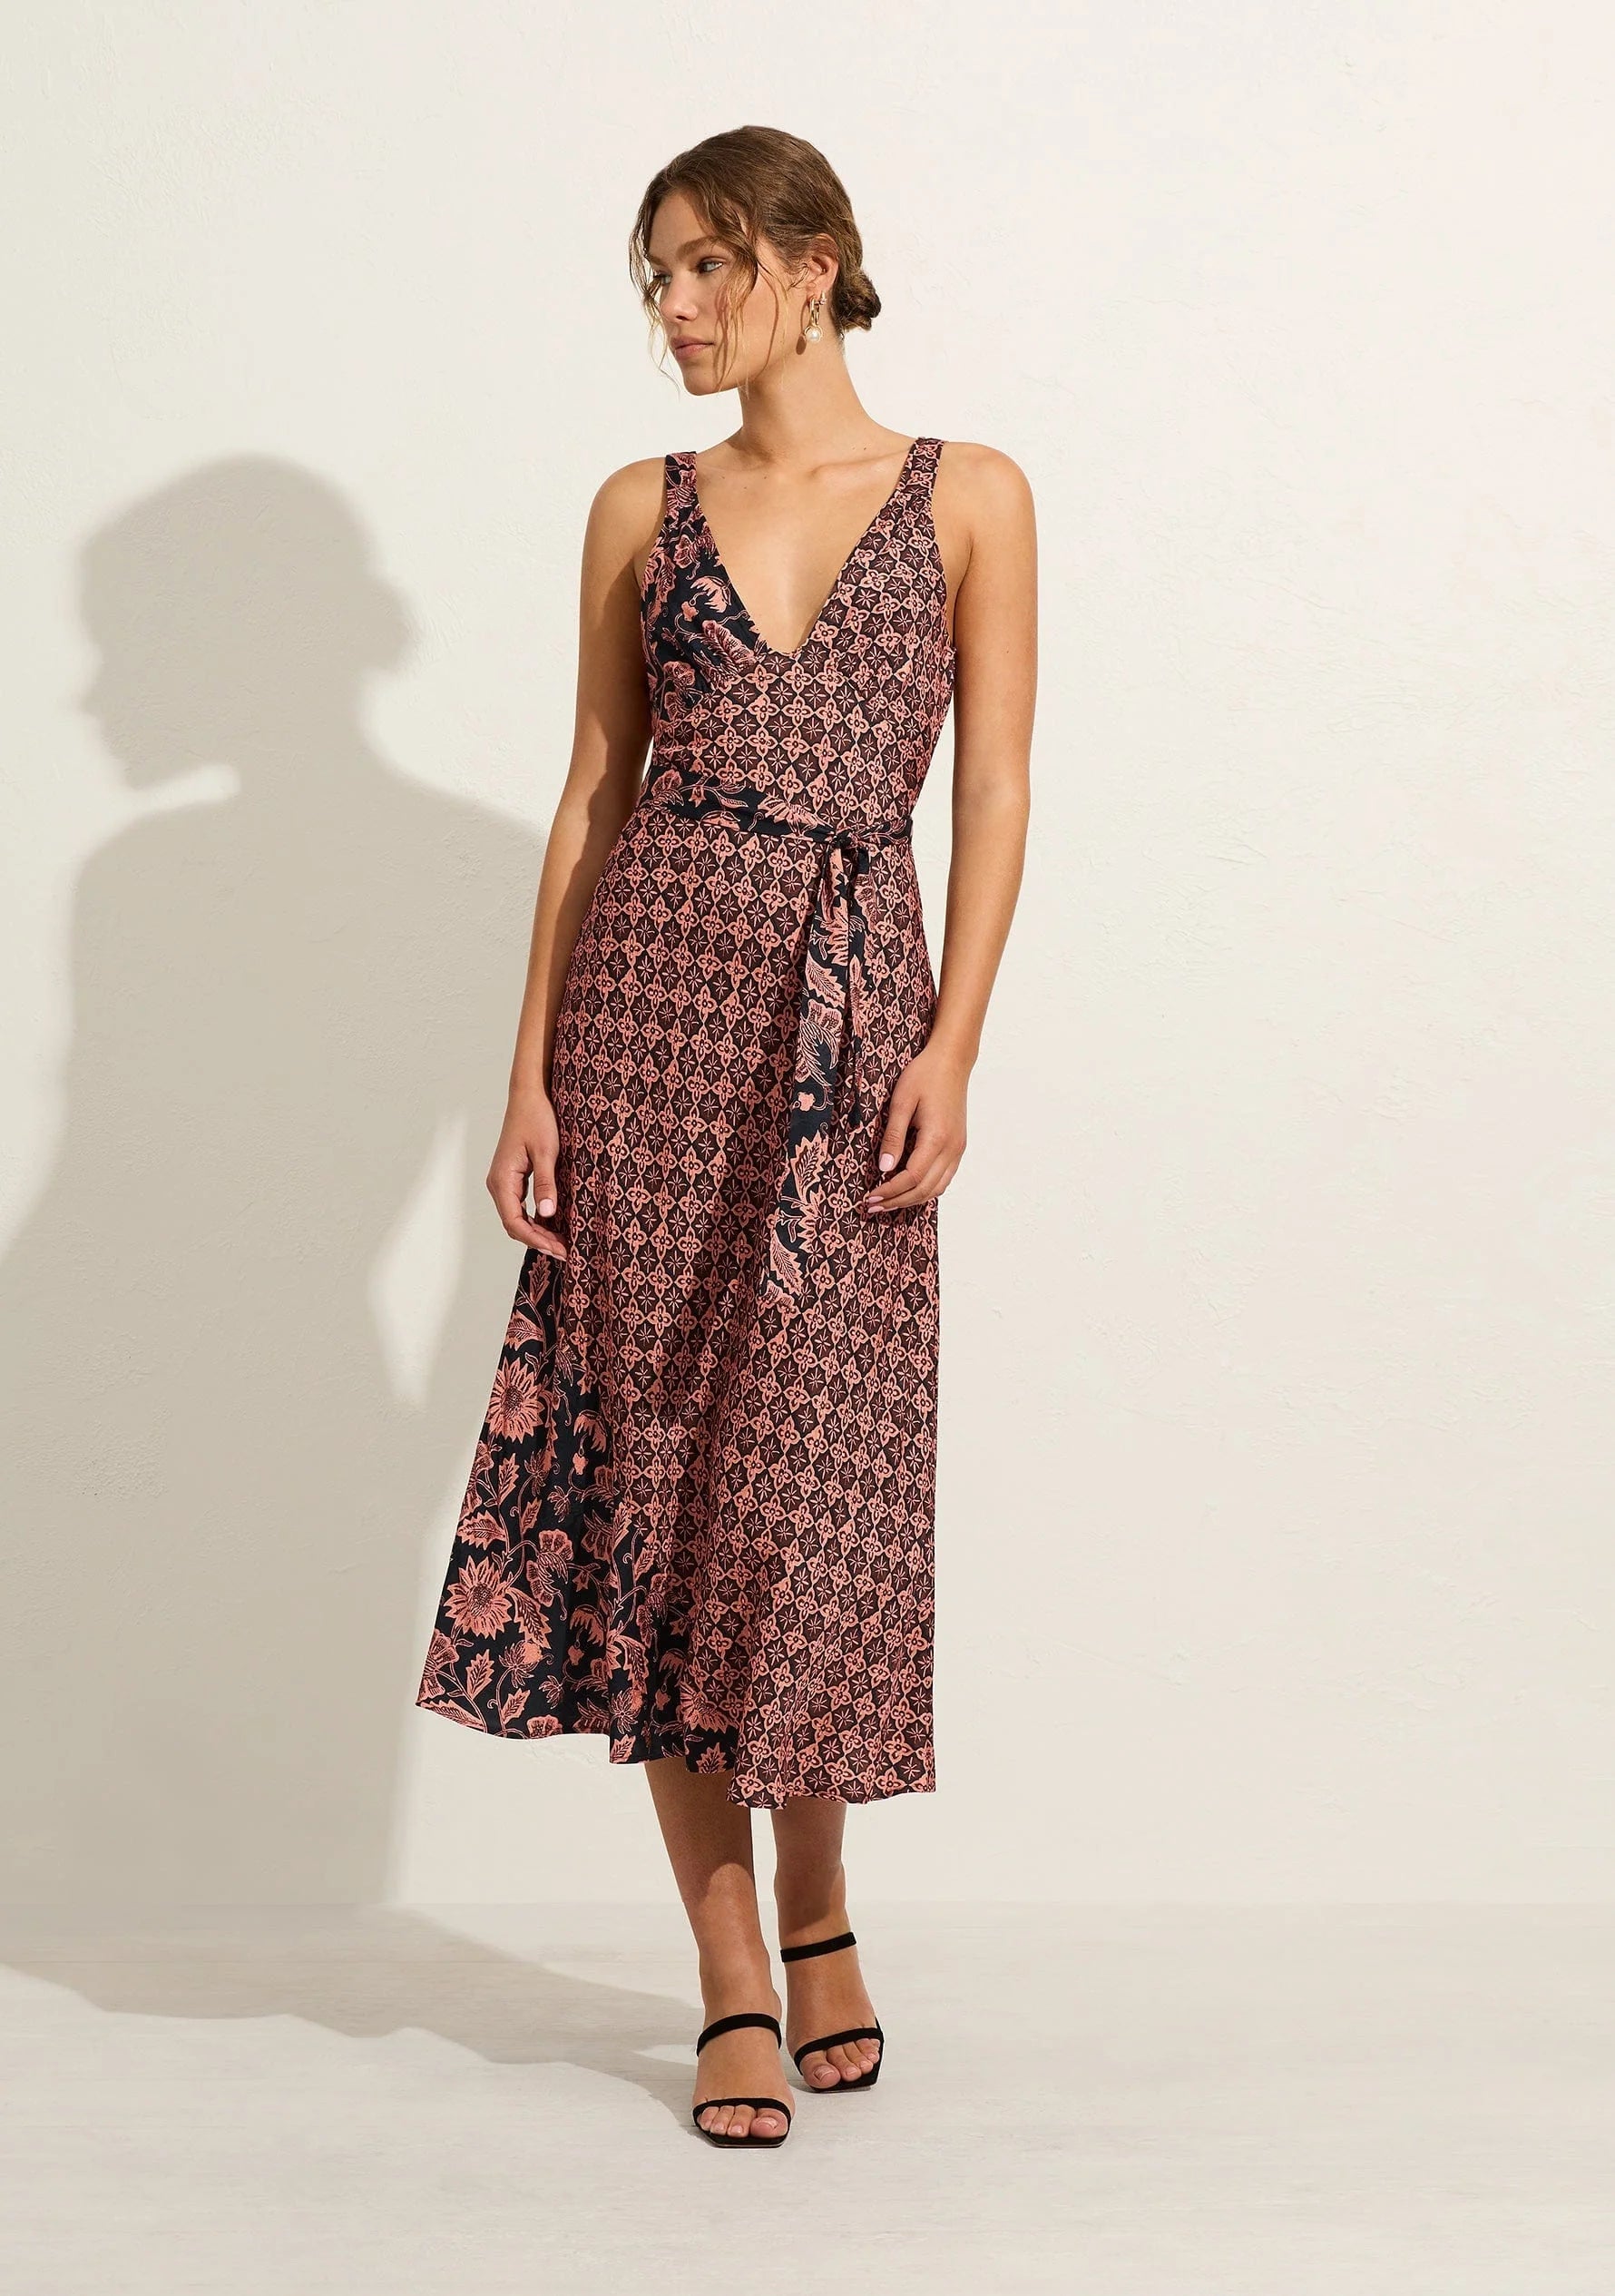 The Mason Midi Dress in contrasting chintz prints makes event dressing effortless. It features a V neckline, softly gathered bust, waist tie for a personalized fit, and a flattering bias-cut silhouette in floral satin finish jacquard with a silky touch.